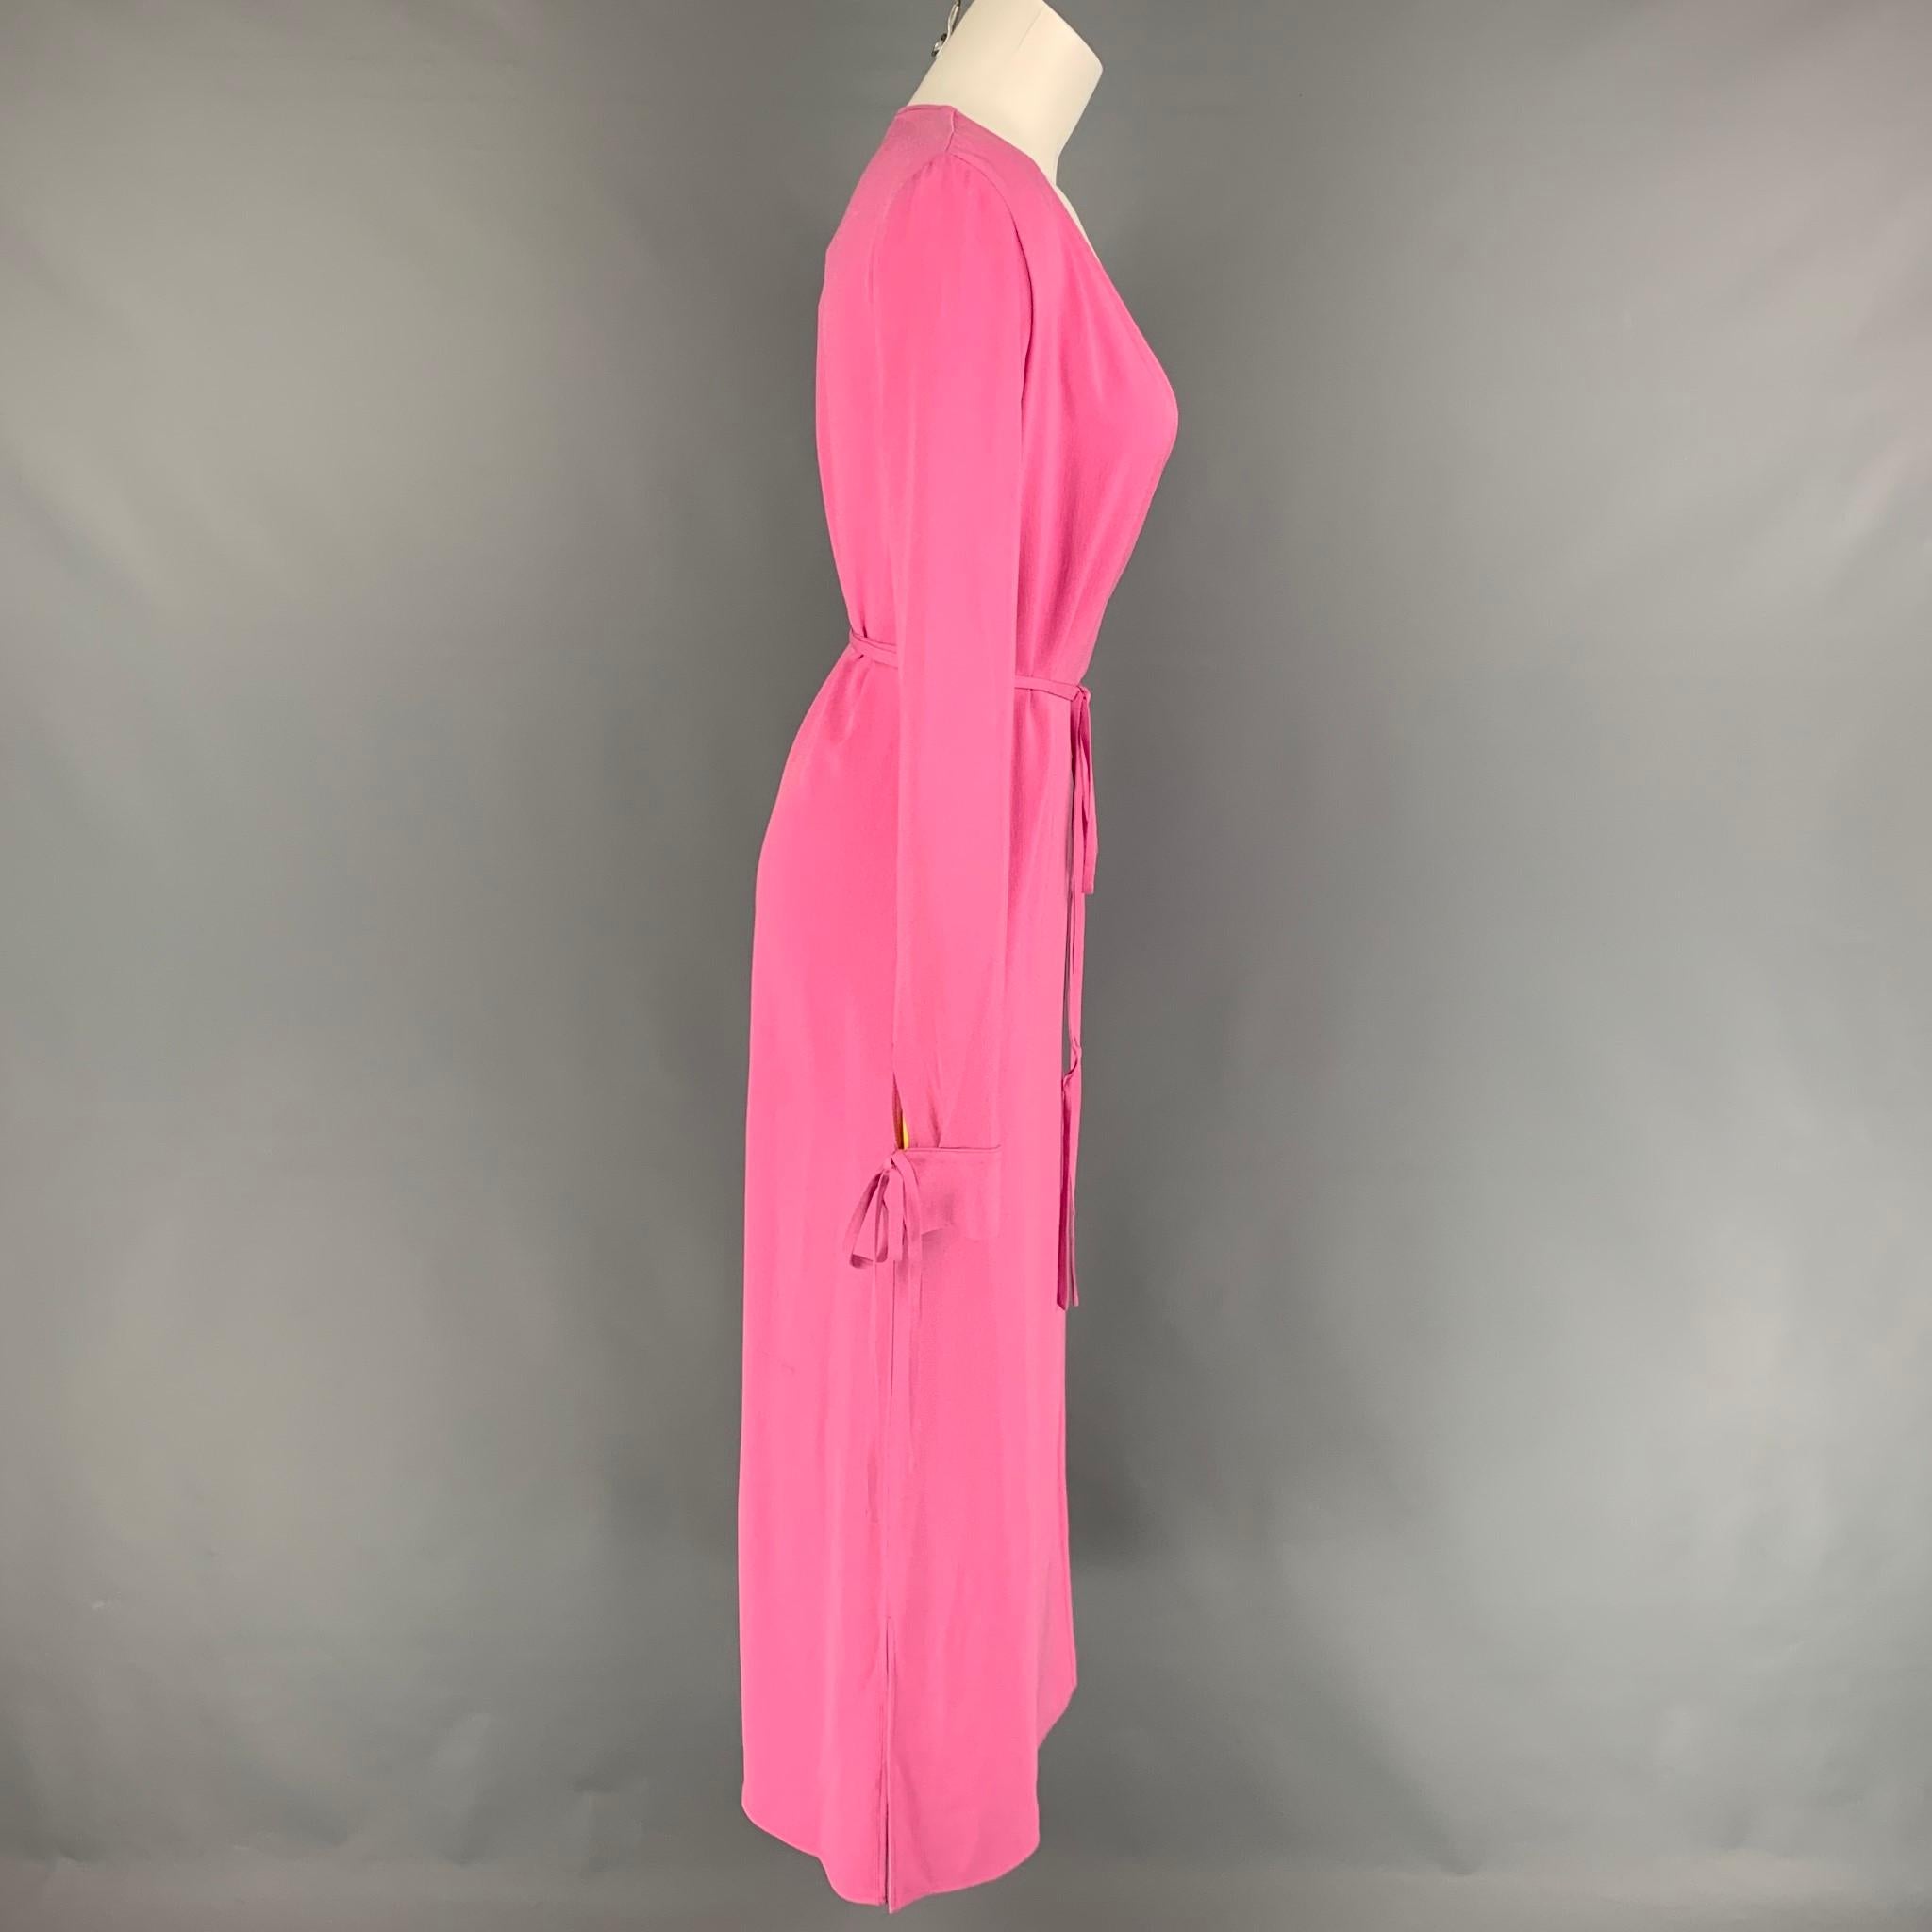 ATTICO dress comes in a pink acetate / viscose featuring a wrap style, sleeve strap details, slit pockets, side slits, and a back self tie strap closure. Made in Italy. 

New With Tags. 
Marked: 36

Measurements:

Shoulder: 15 in.
Bust: 36